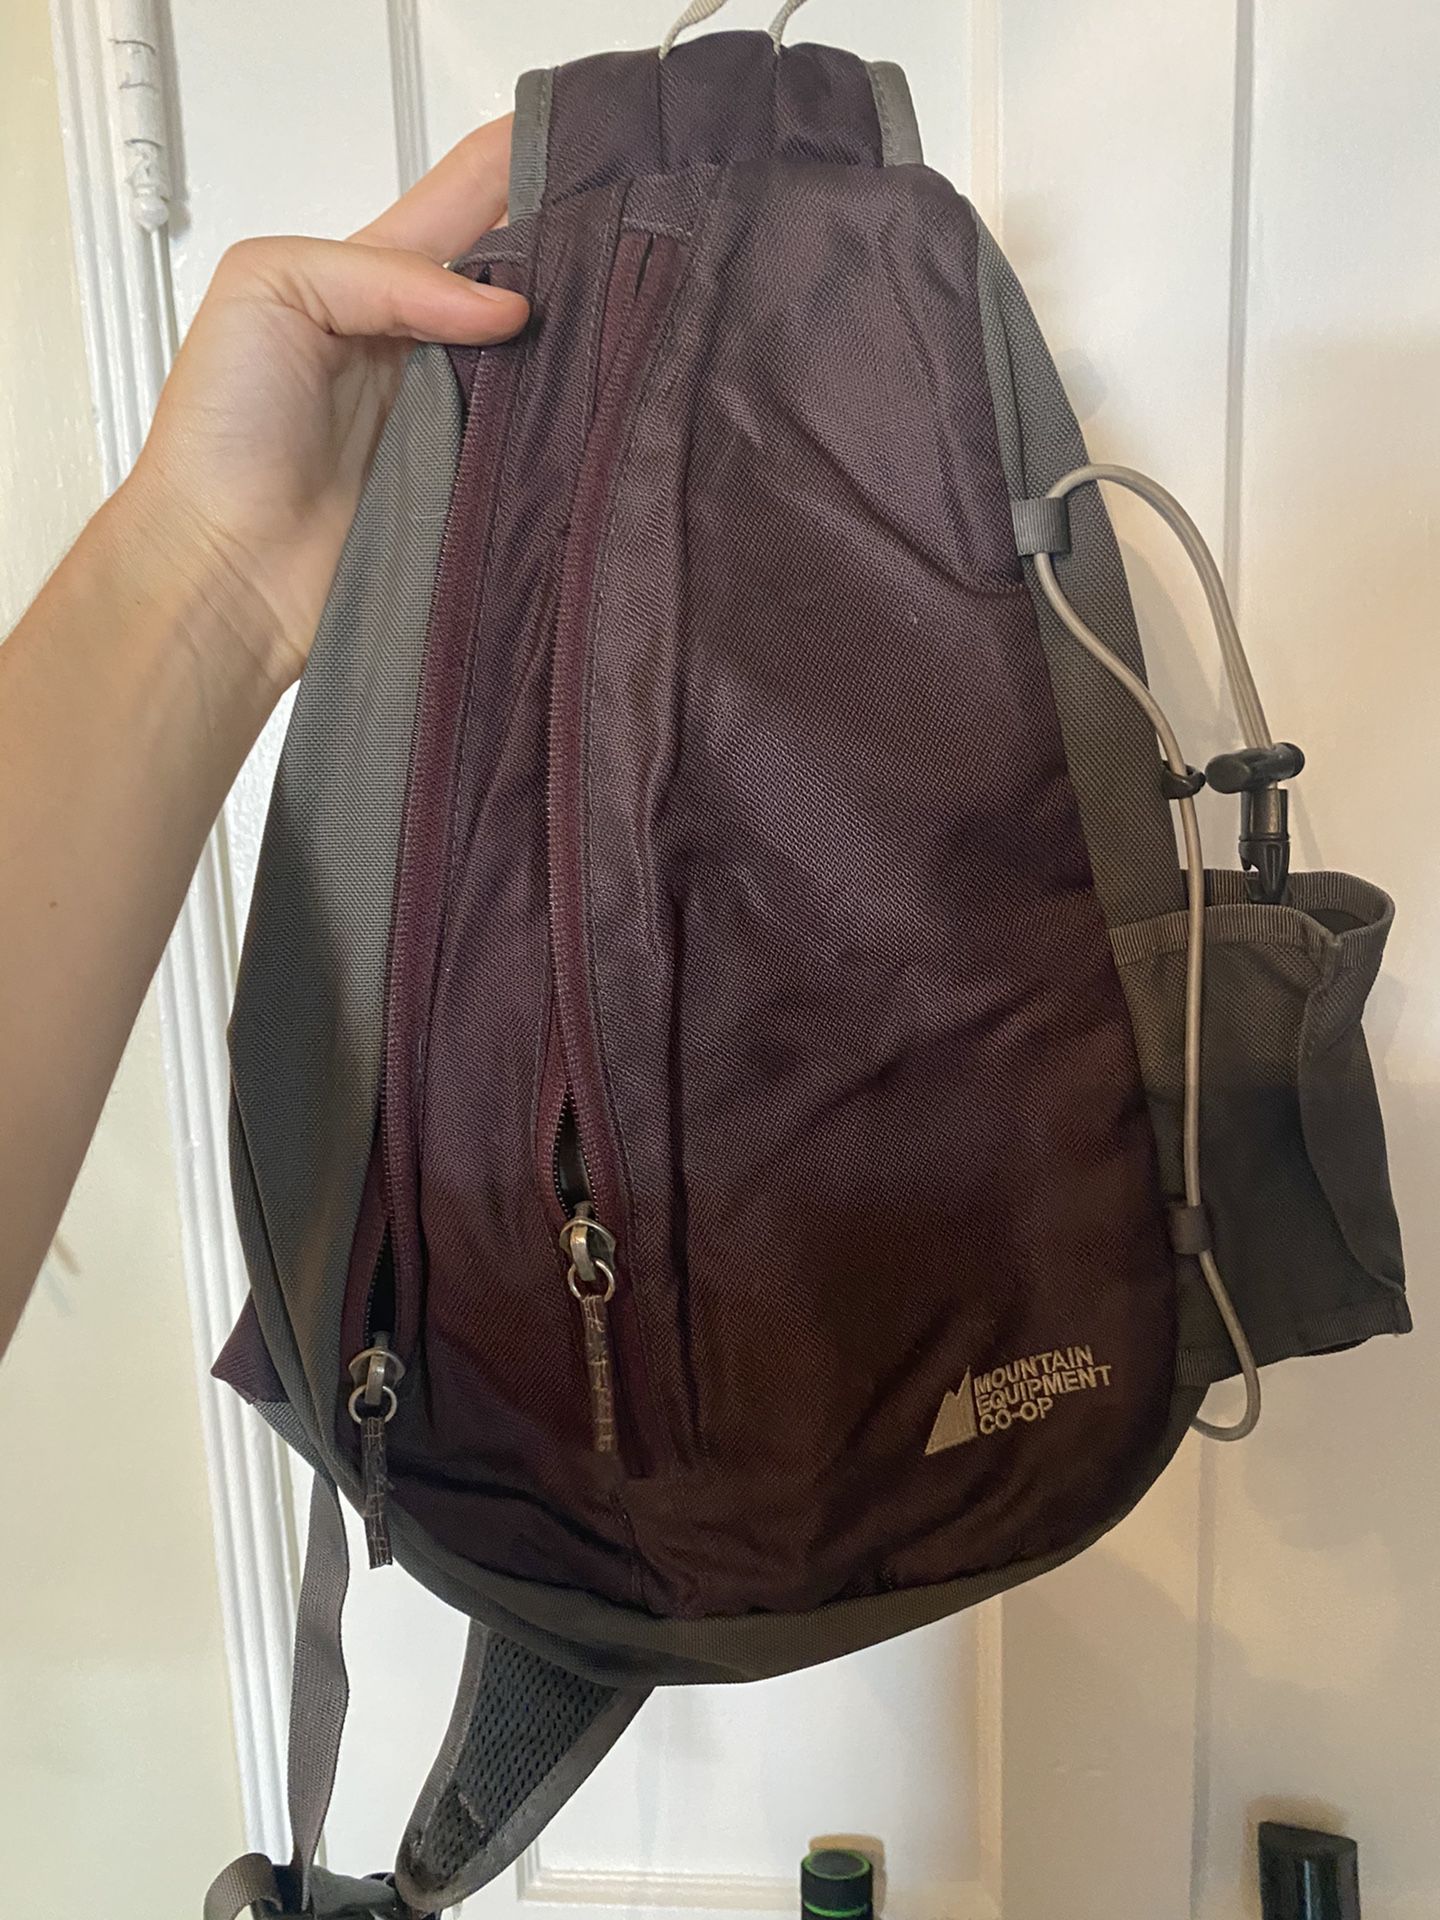 Two sports bags - backpack and bag